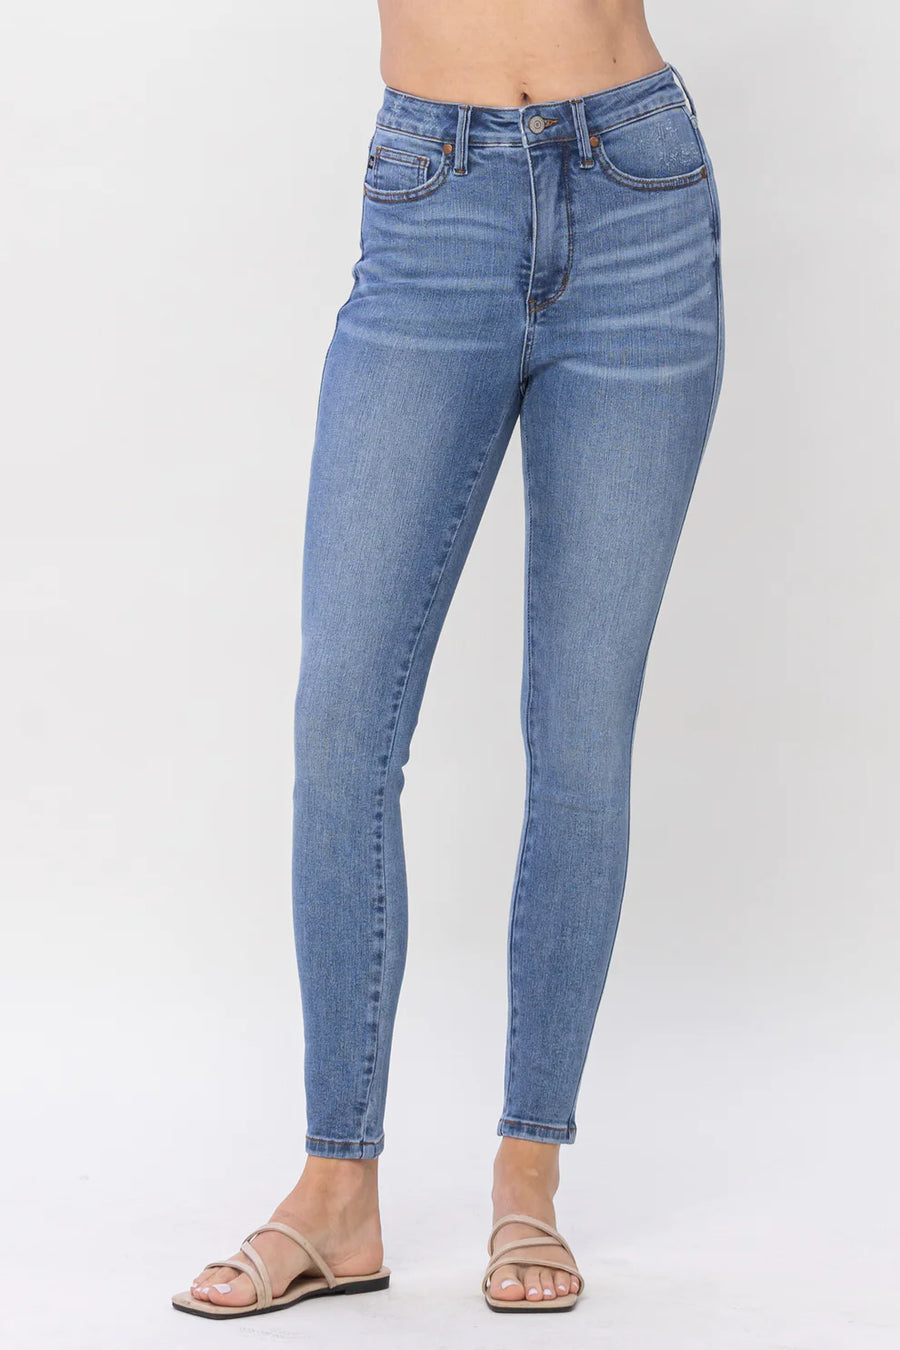 Judy Blue Betsy High Rise Tummy Control Top Shield Pocket Skinny Jeans 88538 - Exclusive-Jeans-Sunshine and Wine Boutique